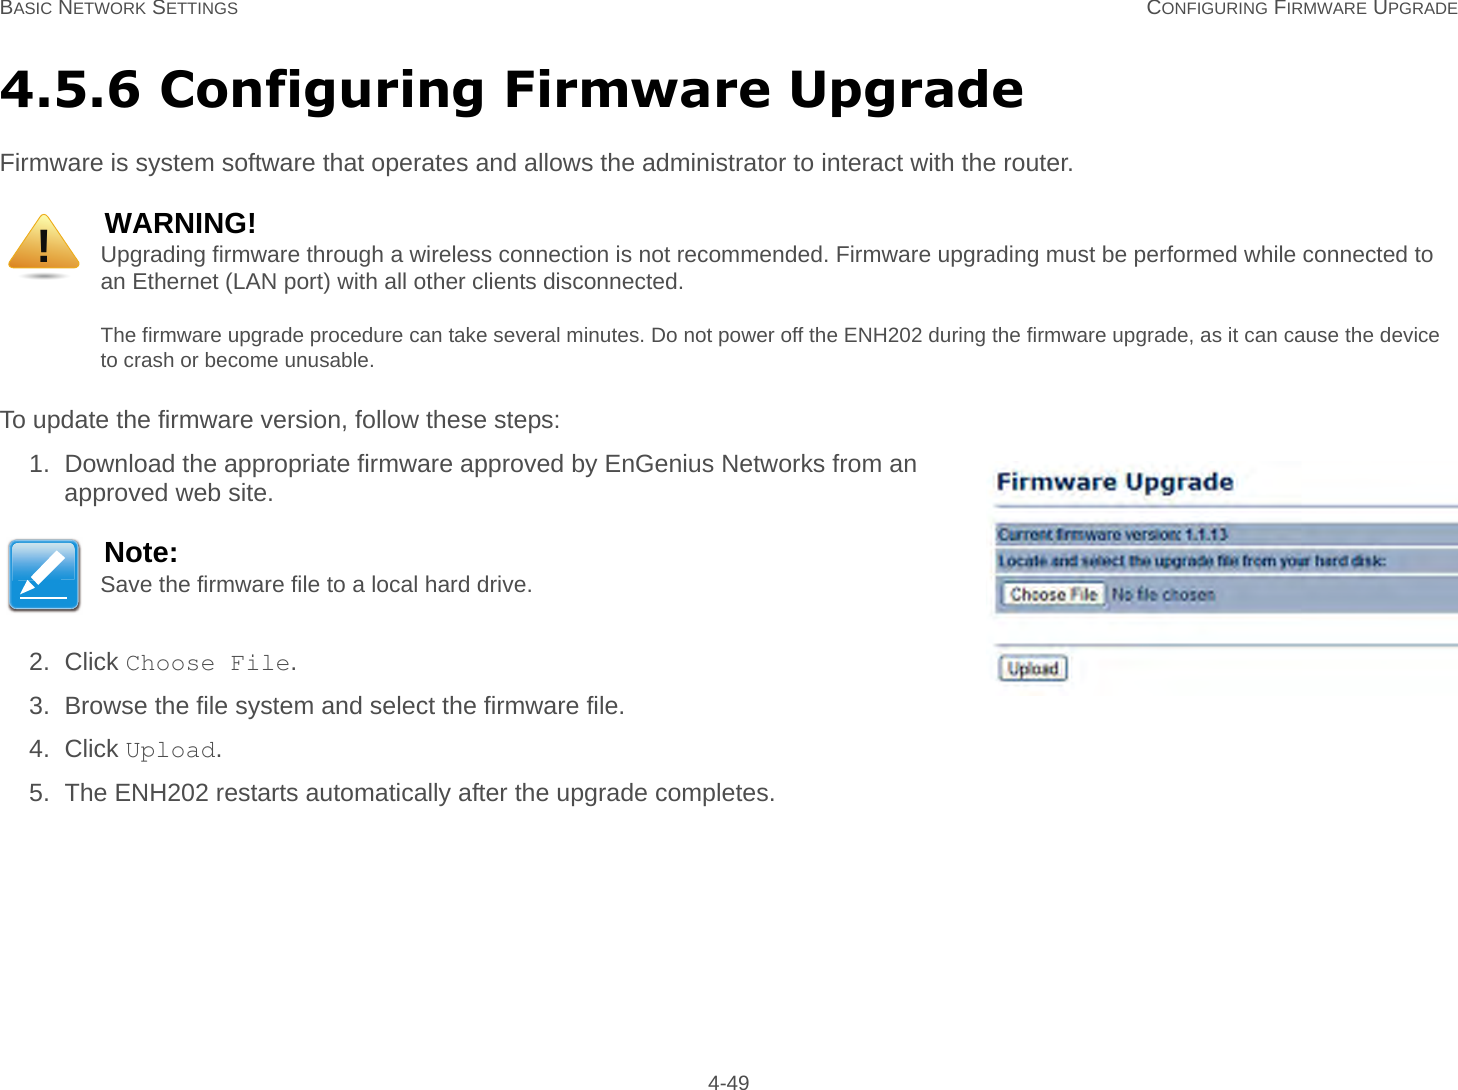 BASIC NETWORK SETTINGS CONFIGURING FIRMWARE UPGRADE 4-494.5.6 Configuring Firmware UpgradeFirmware is system software that operates and allows the administrator to interact with the router.To update the firmware version, follow these steps:1. Download the appropriate firmware approved by EnGenius Networks from an approved web site.2. Click Choose File.3. Browse the file system and select the firmware file.4. Click Upload.5. The ENH202 restarts automatically after the upgrade completes.WARNING!Upgrading firmware through a wireless connection is not recommended. Firmware upgrading must be performed while connected to an Ethernet (LAN port) with all other clients disconnected.The firmware upgrade procedure can take several minutes. Do not power off the ENH202 during the firmware upgrade, as it can cause the device to crash or become unusable.Note:Save the firmware file to a local hard drive.!